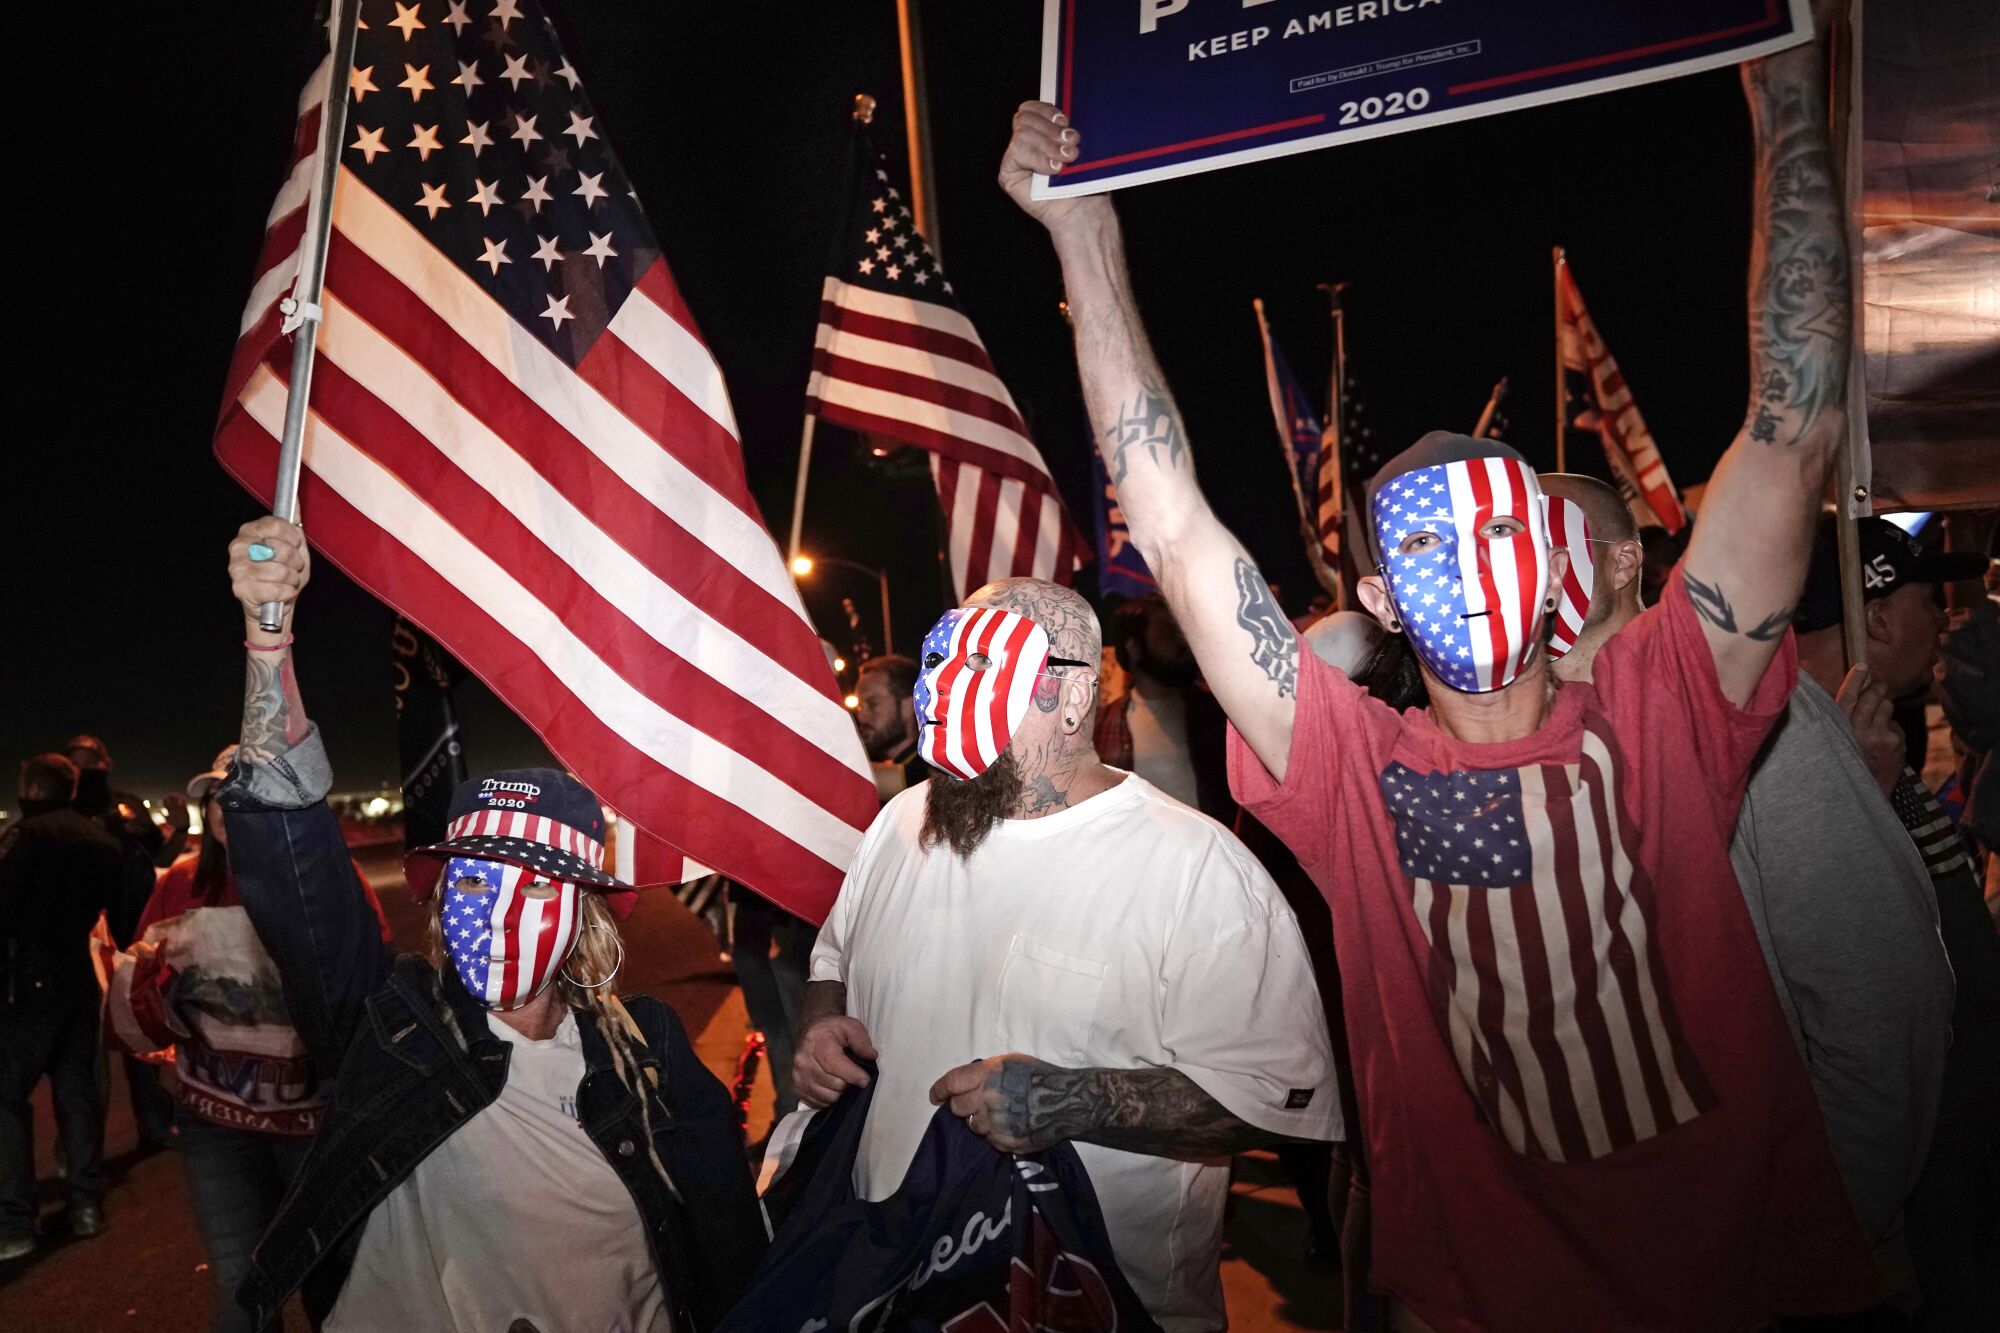 People in U.S. flag masks and Trump gear wave flags and Trump campaign signs